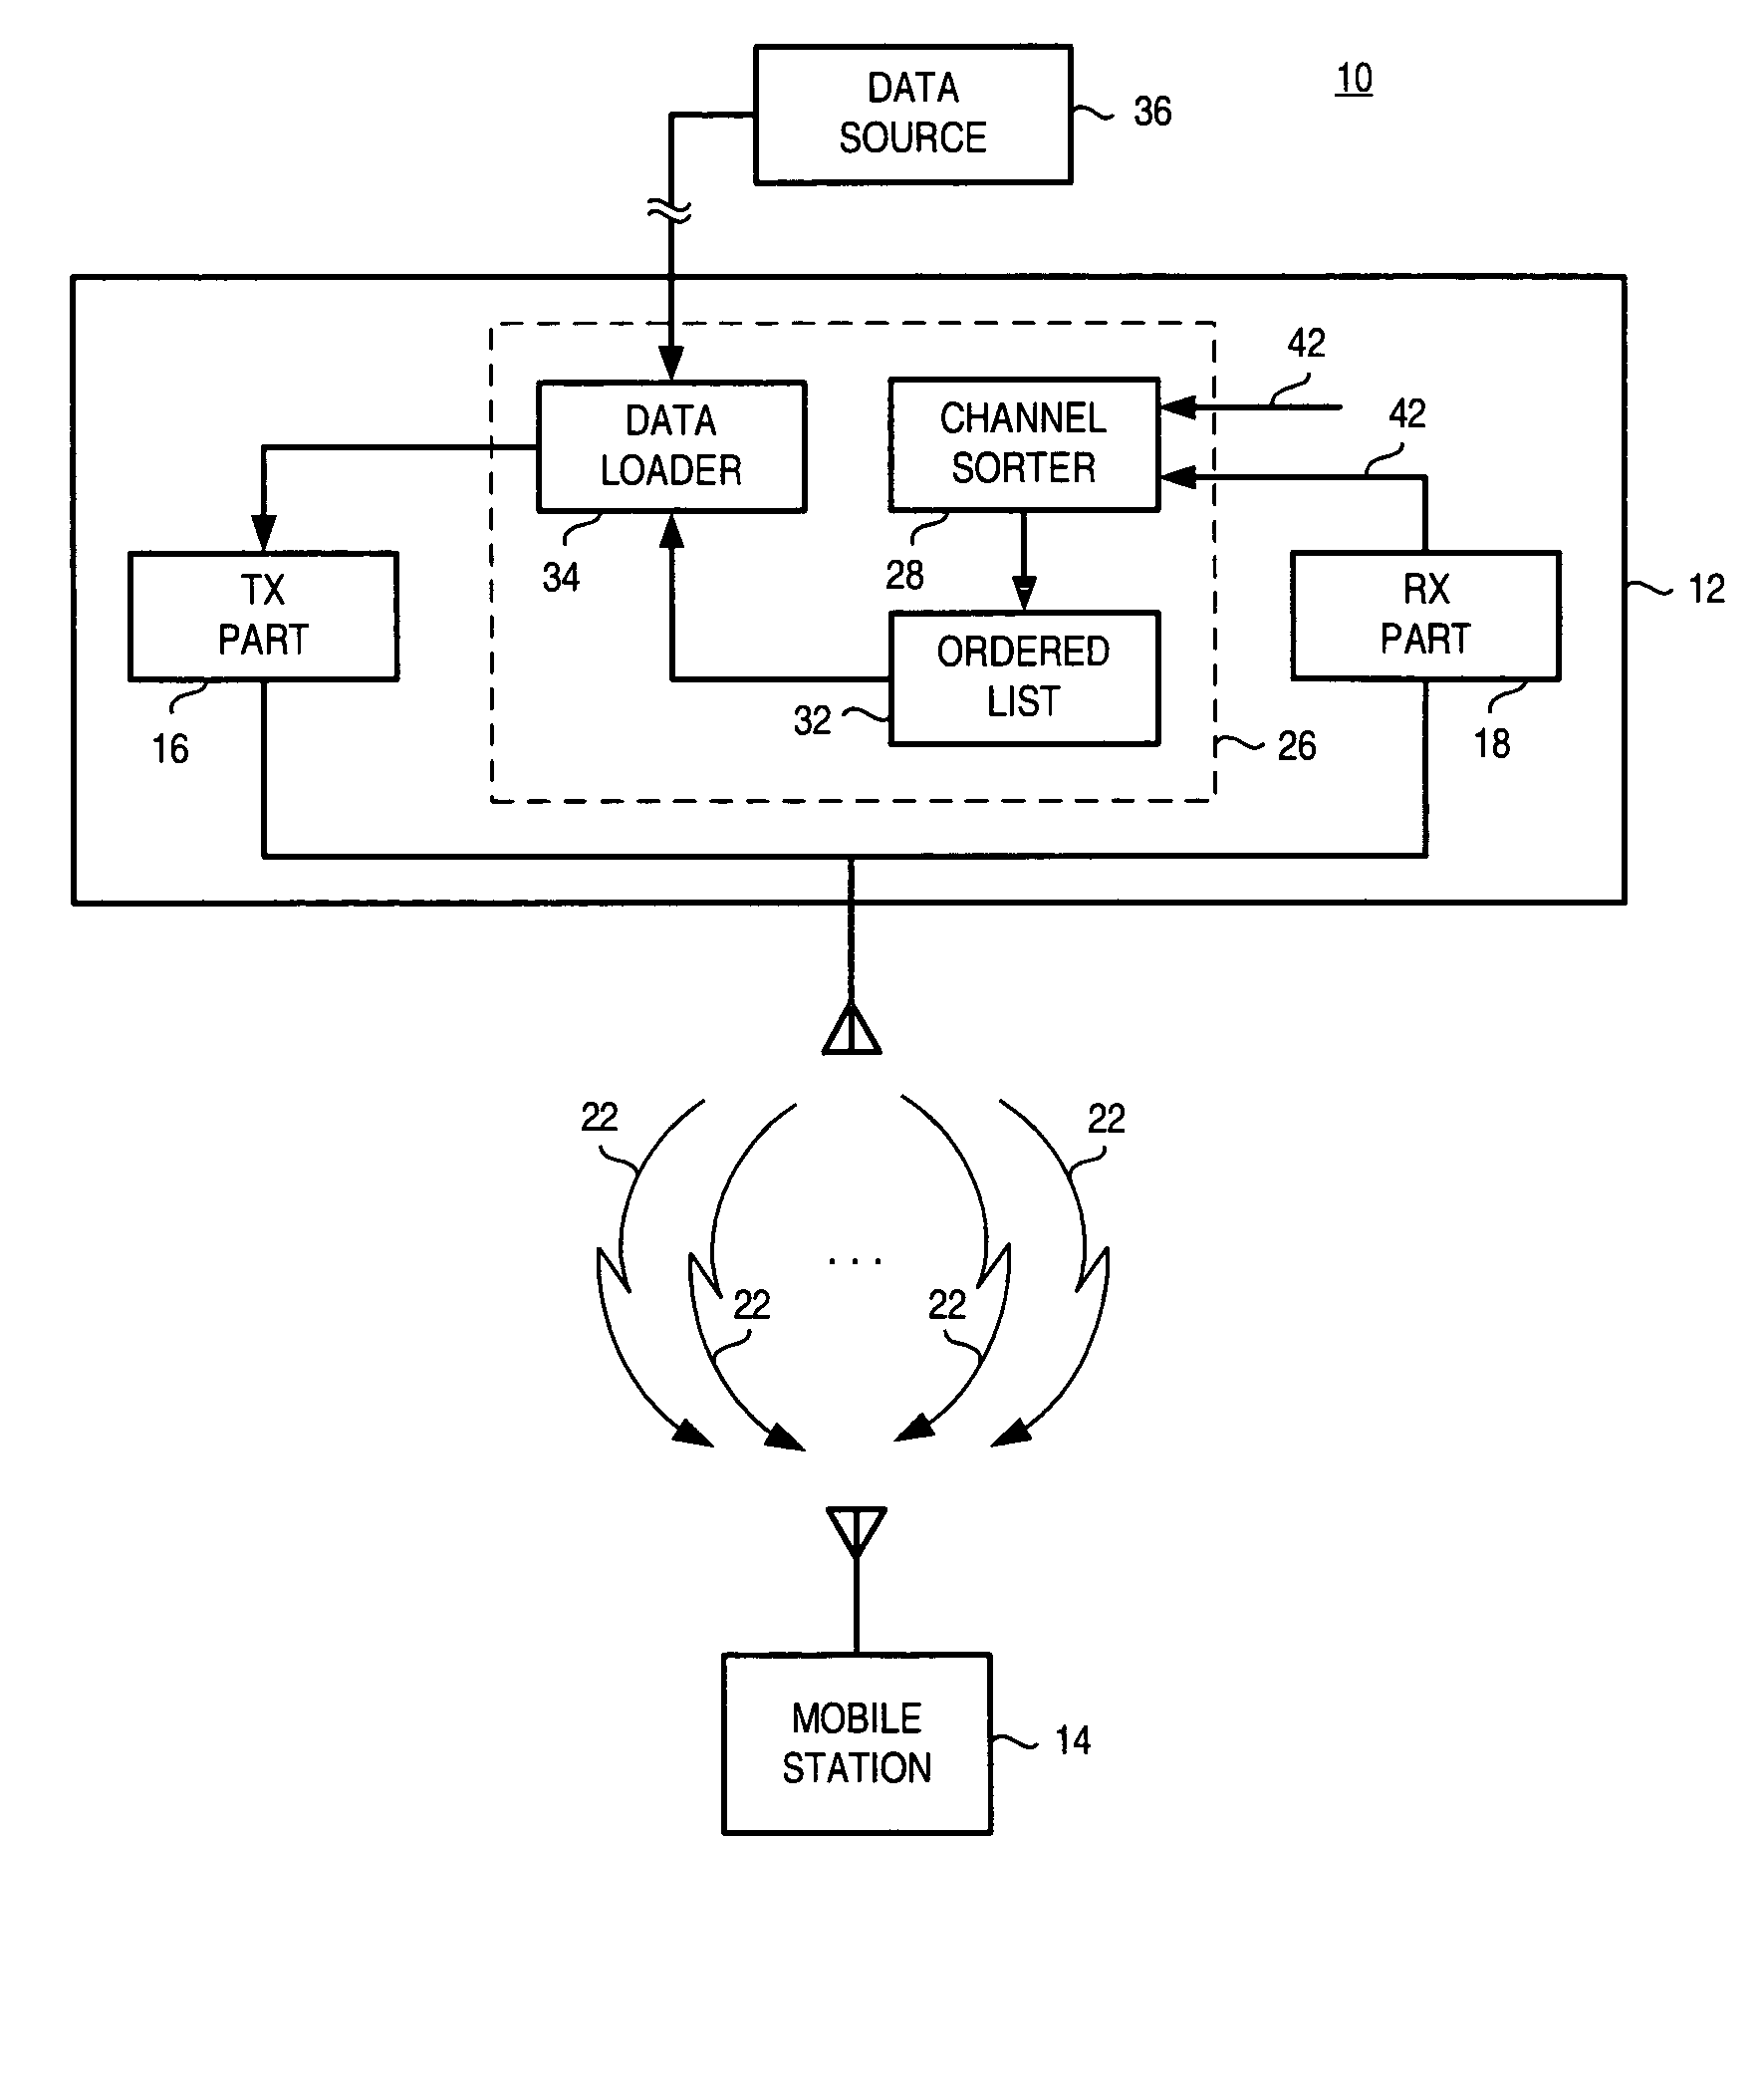 Apparatus, and associated method, for allocating data for communication upon communication channels in a multiple input communication system